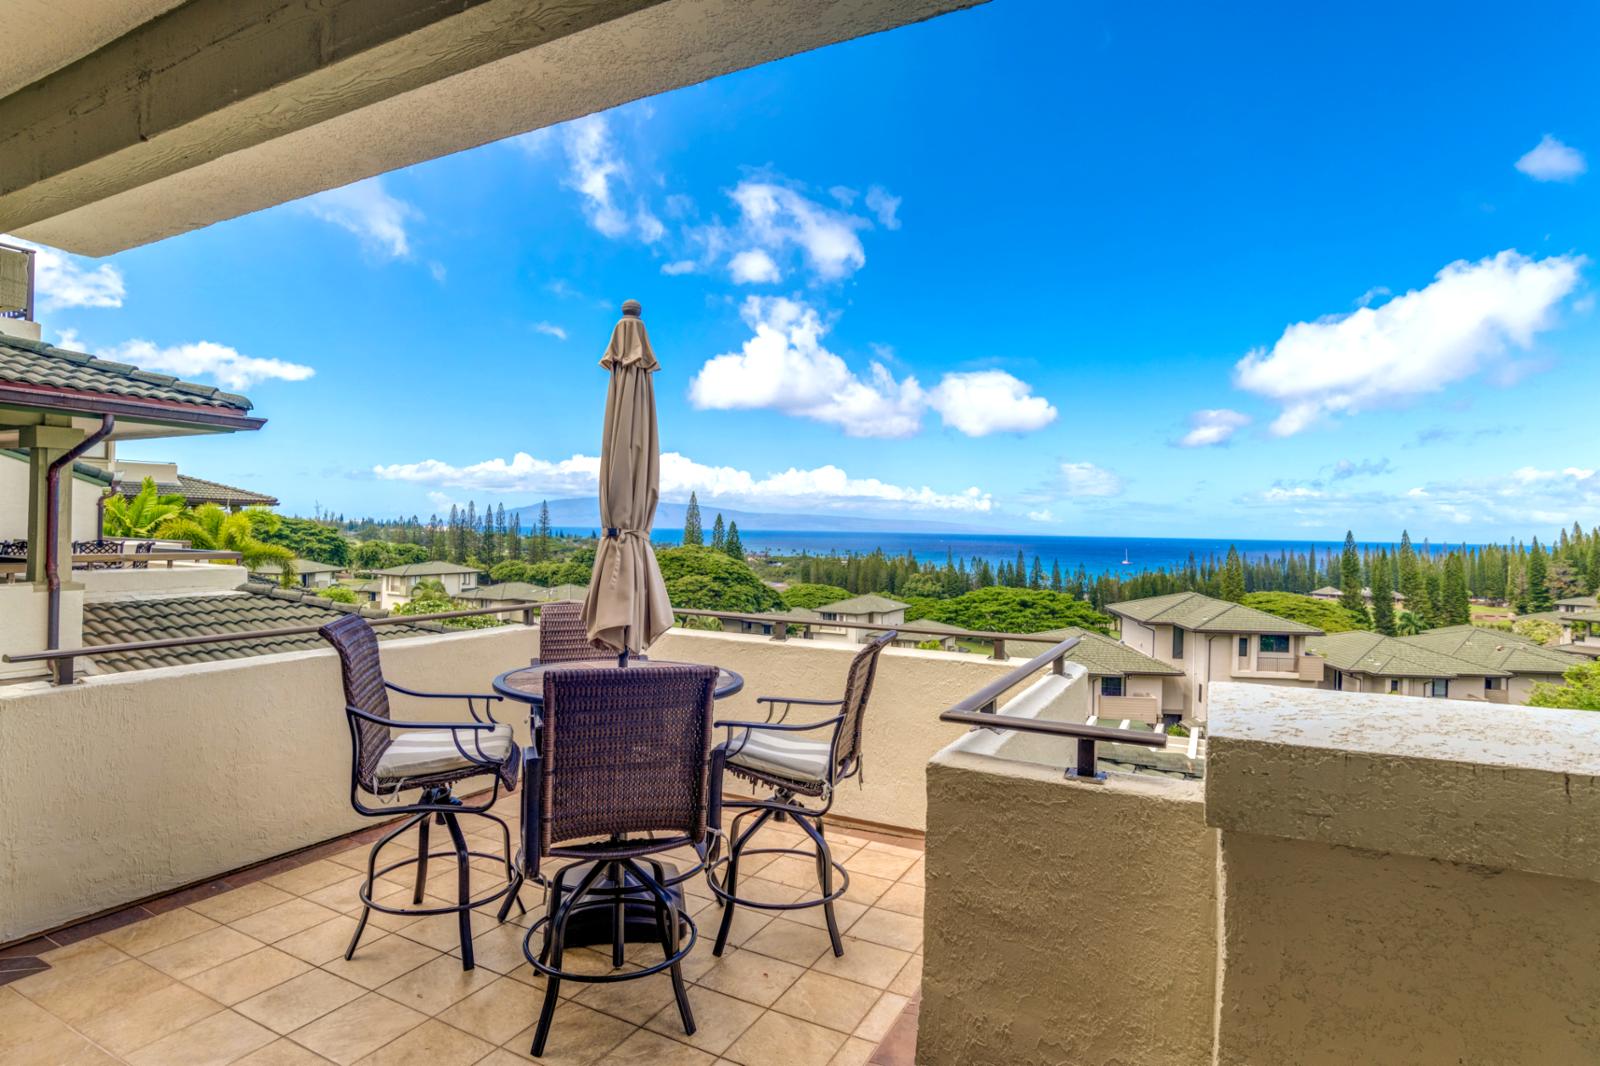 Property Image 1 - KGV-22T5 Stunning 1Bdrm upgraded villa with ocean views, custom remodel!